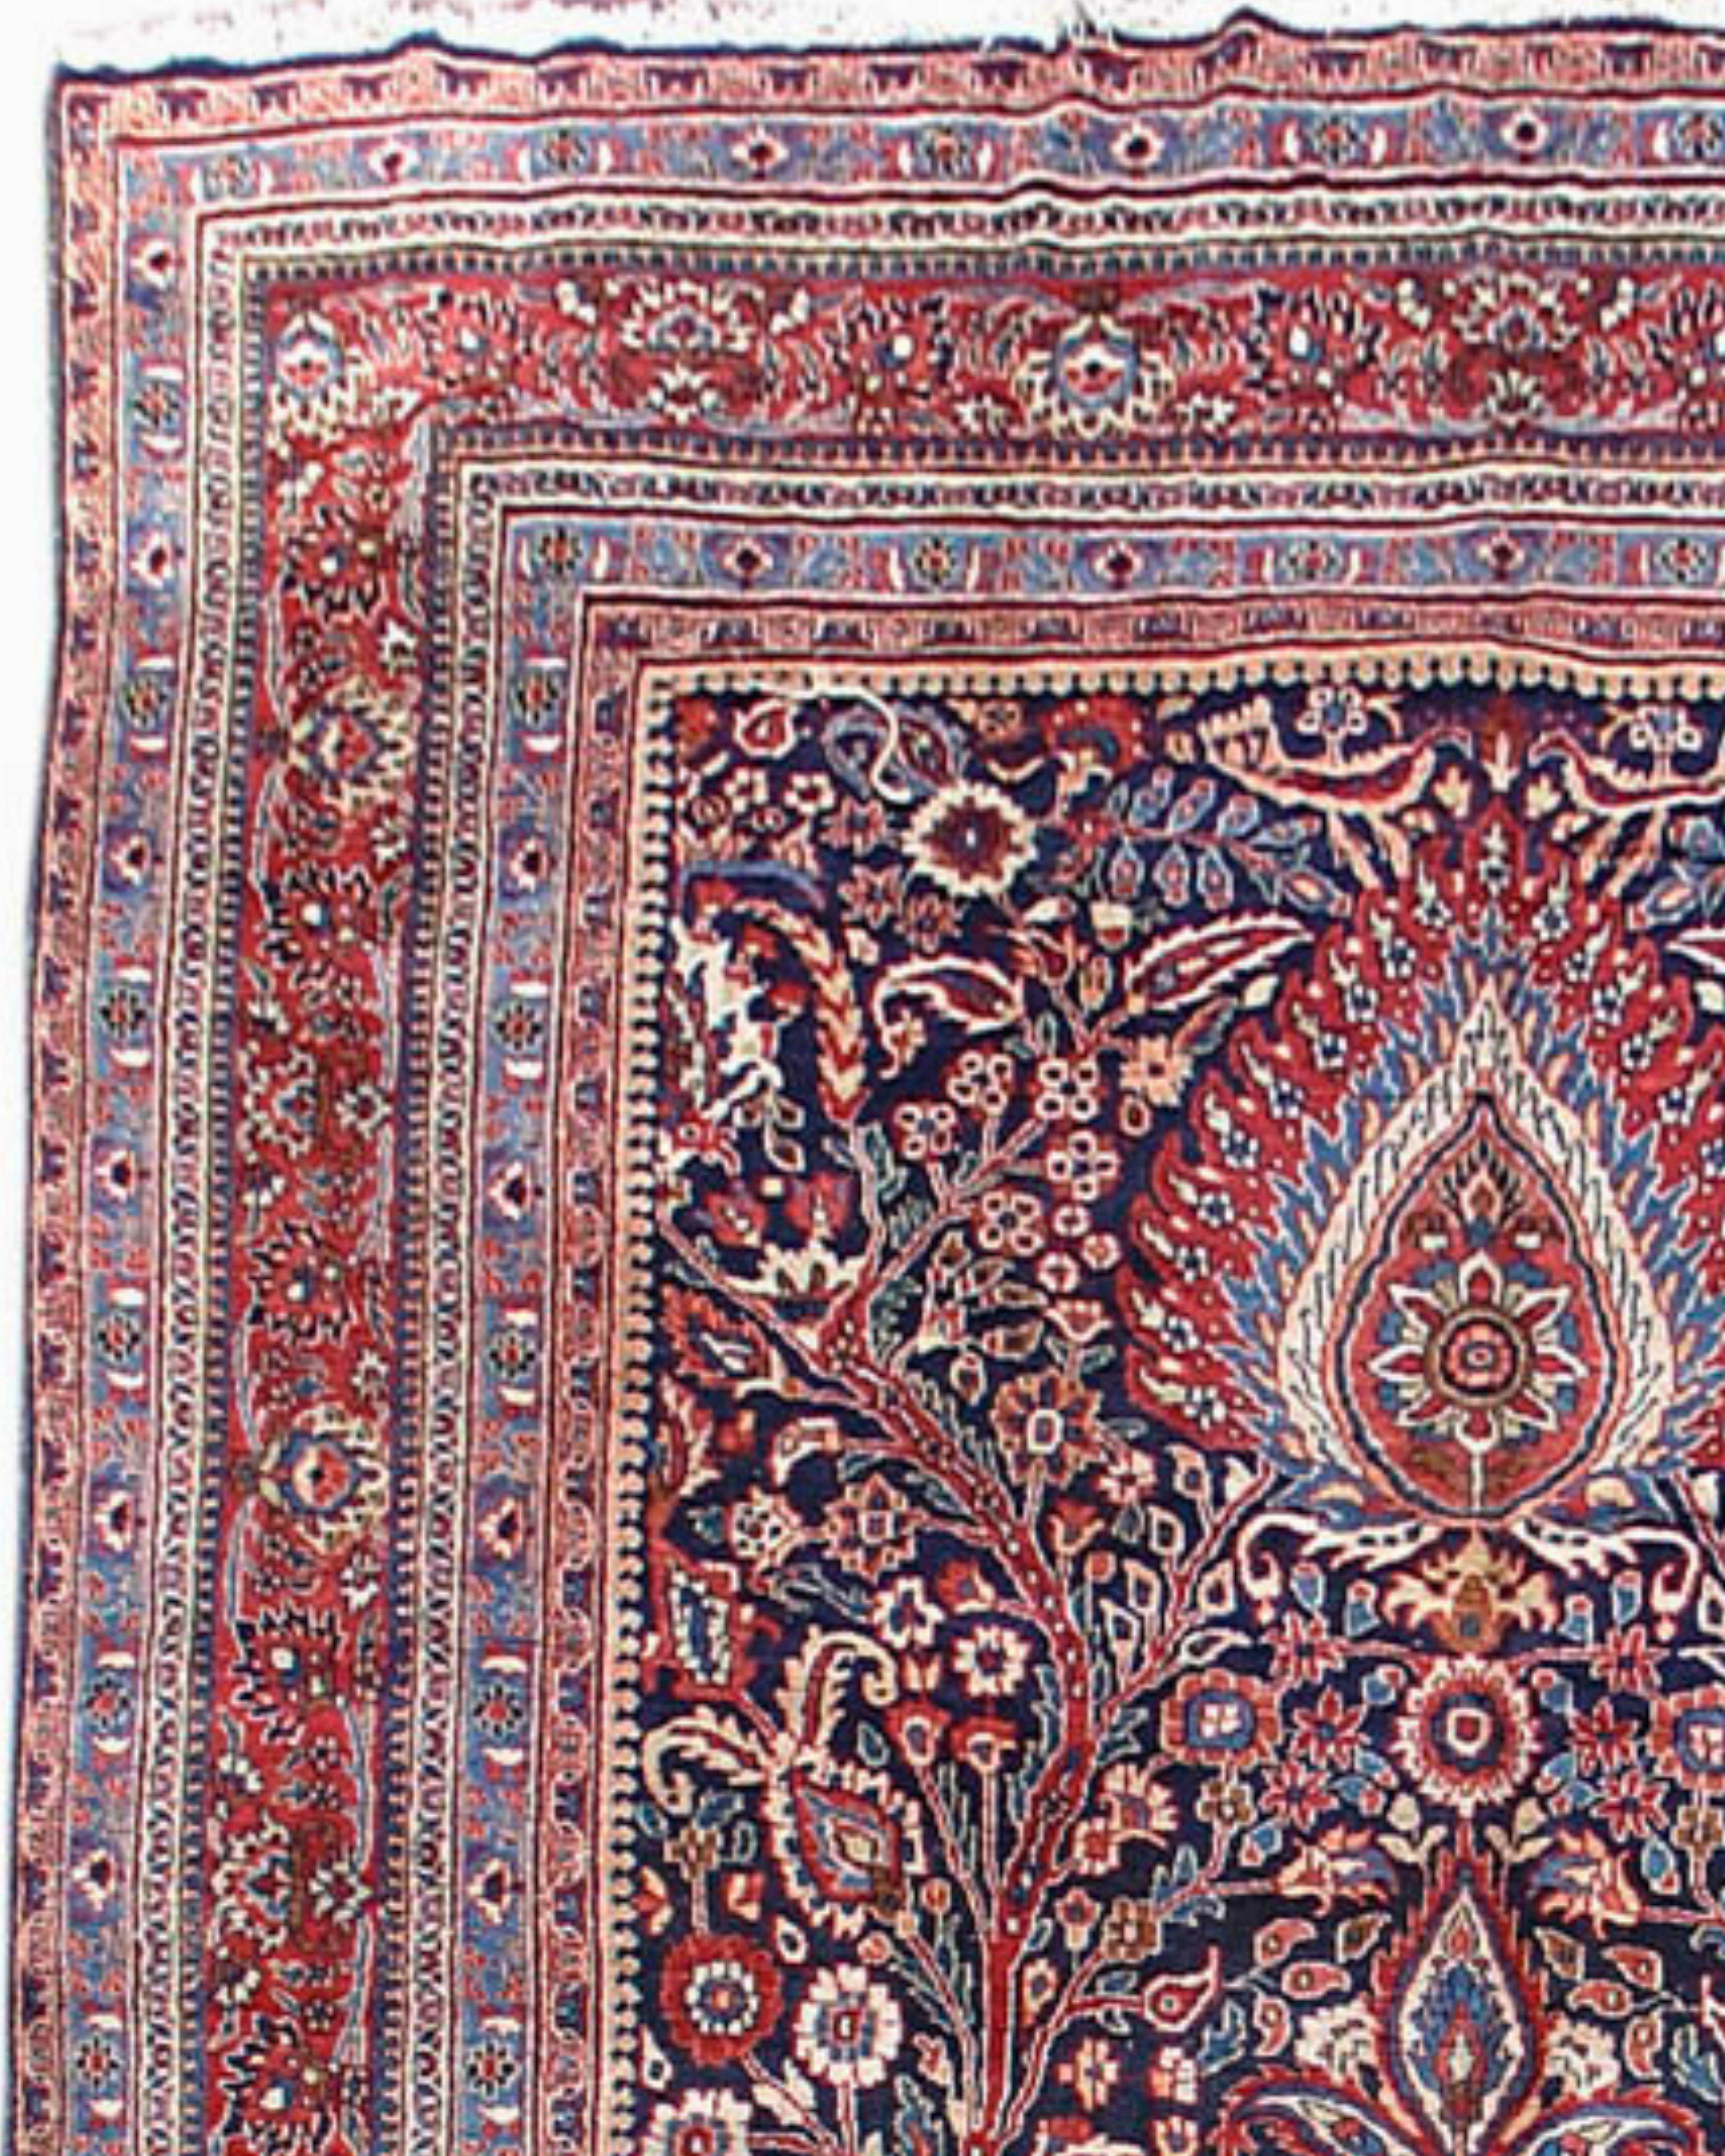 Hand-Woven Antique Persian Mashad Rug, Mid-20th Century For Sale